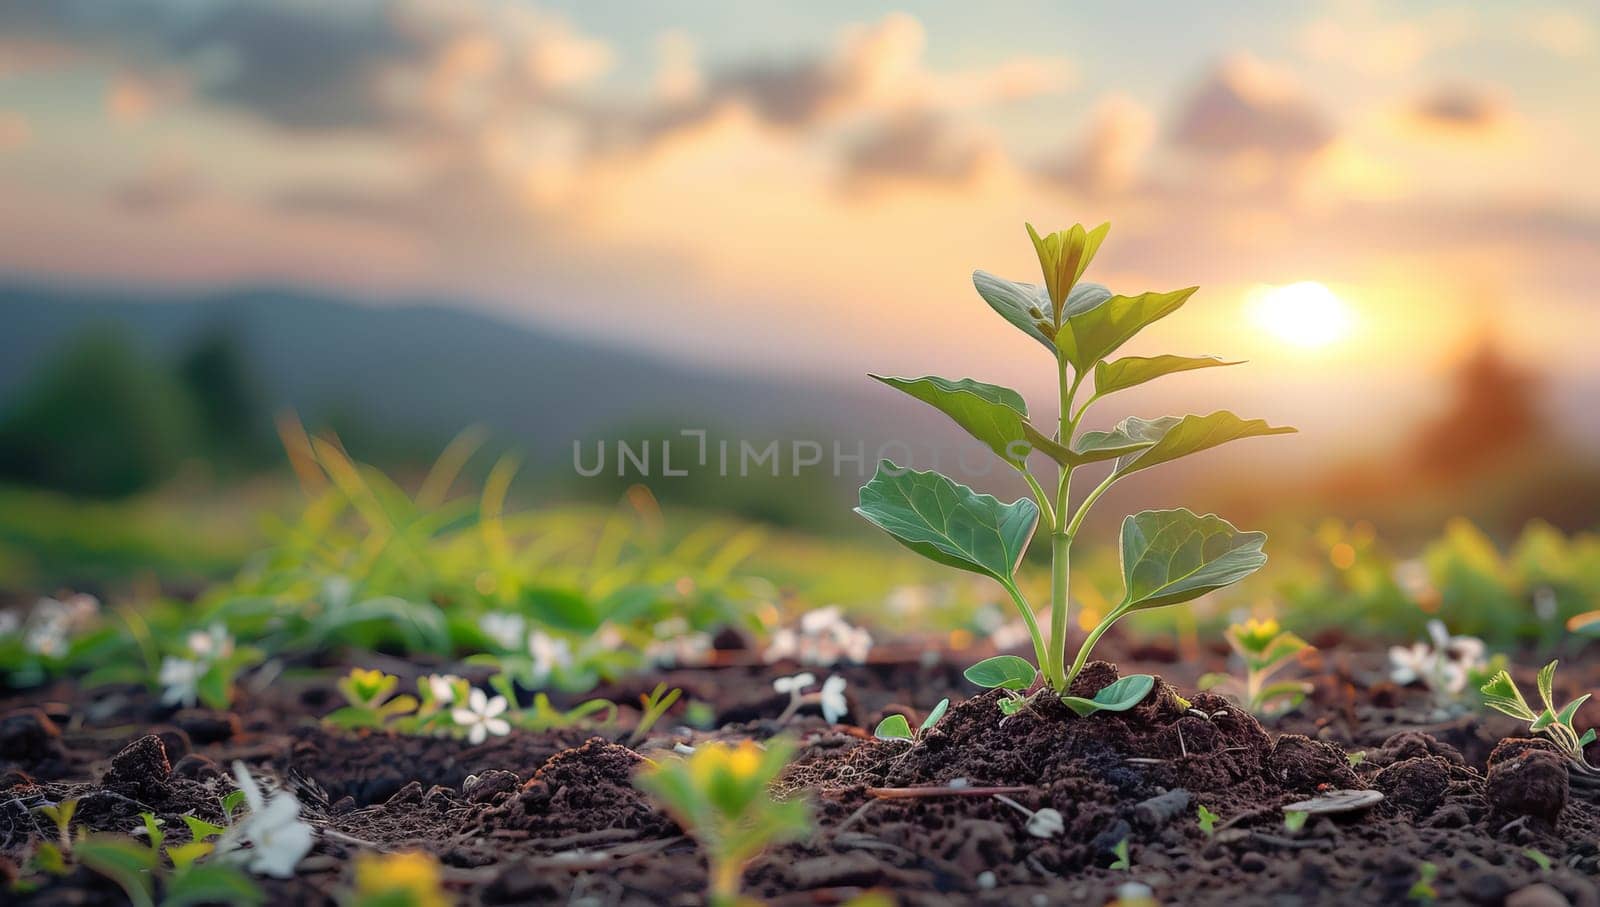 Soybean seedling stands tall in field during a vibrant sunset.